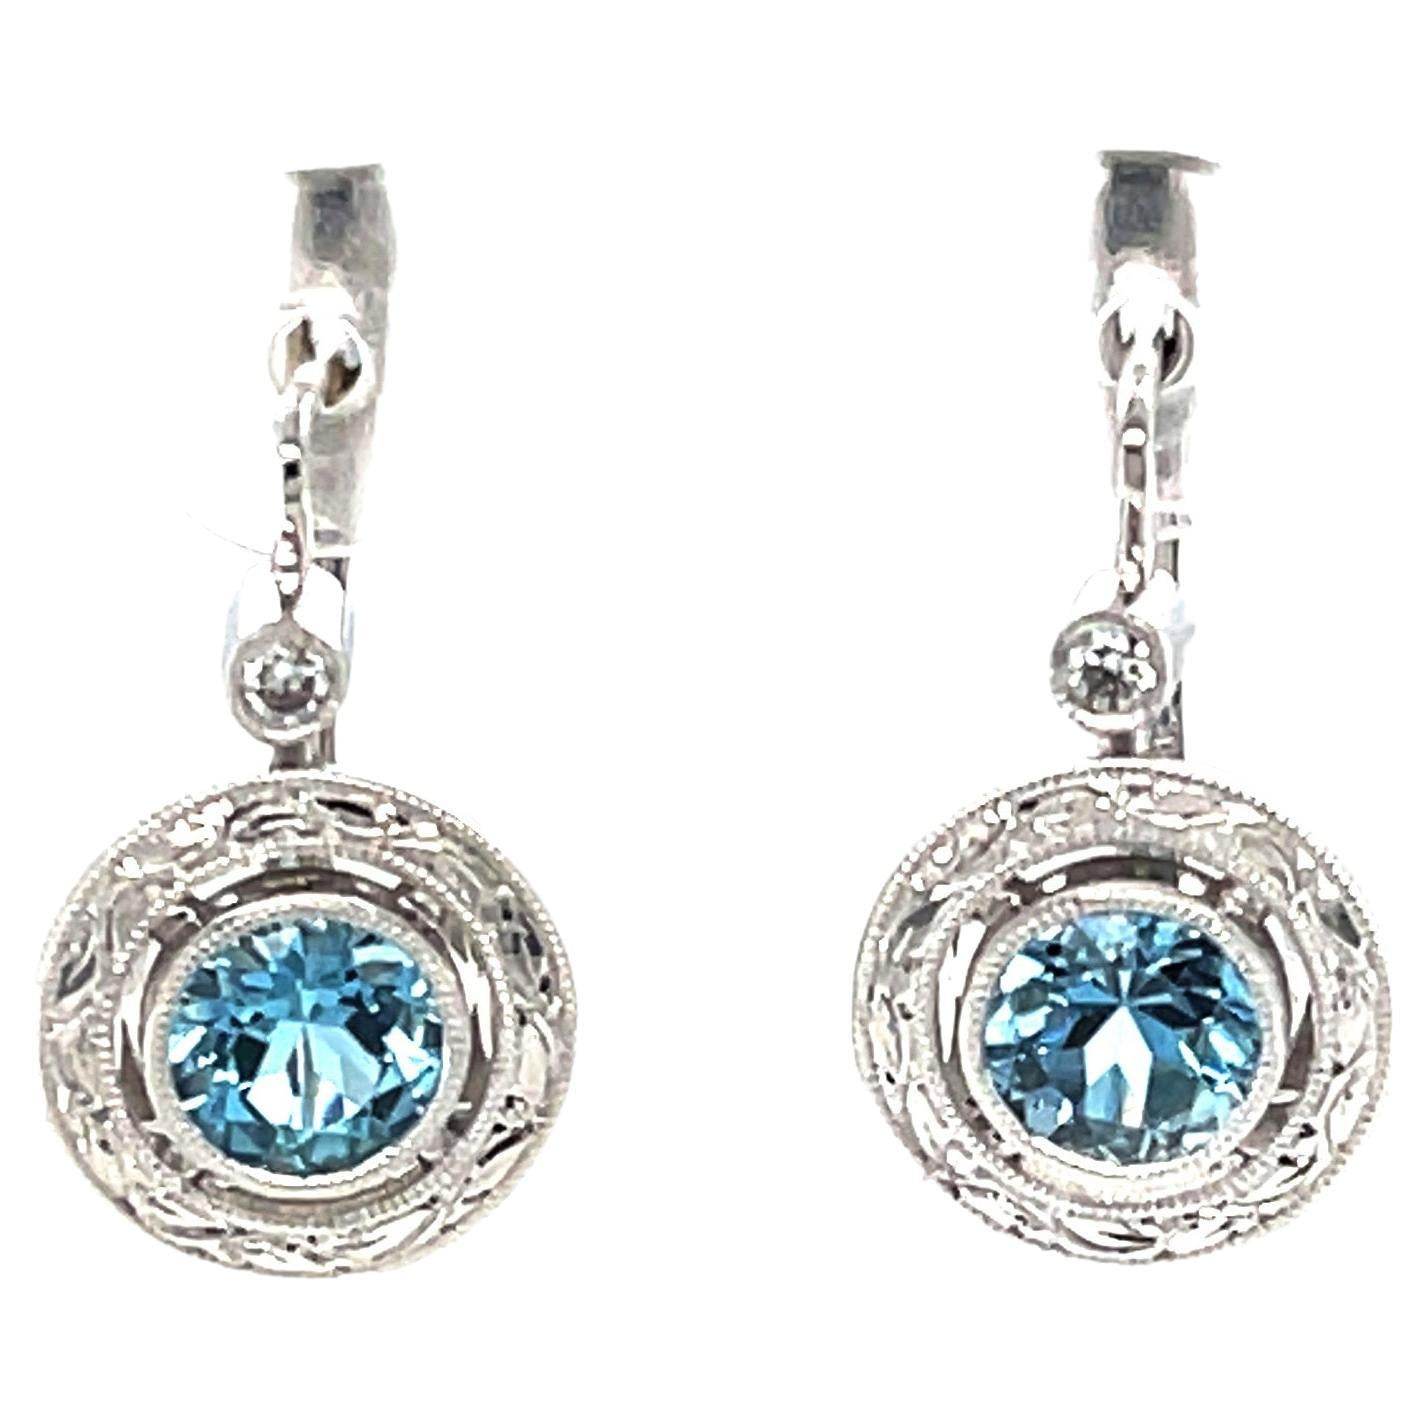 Aquamarine and Diamond Drop Earrings in White Gold Bezels with Clips